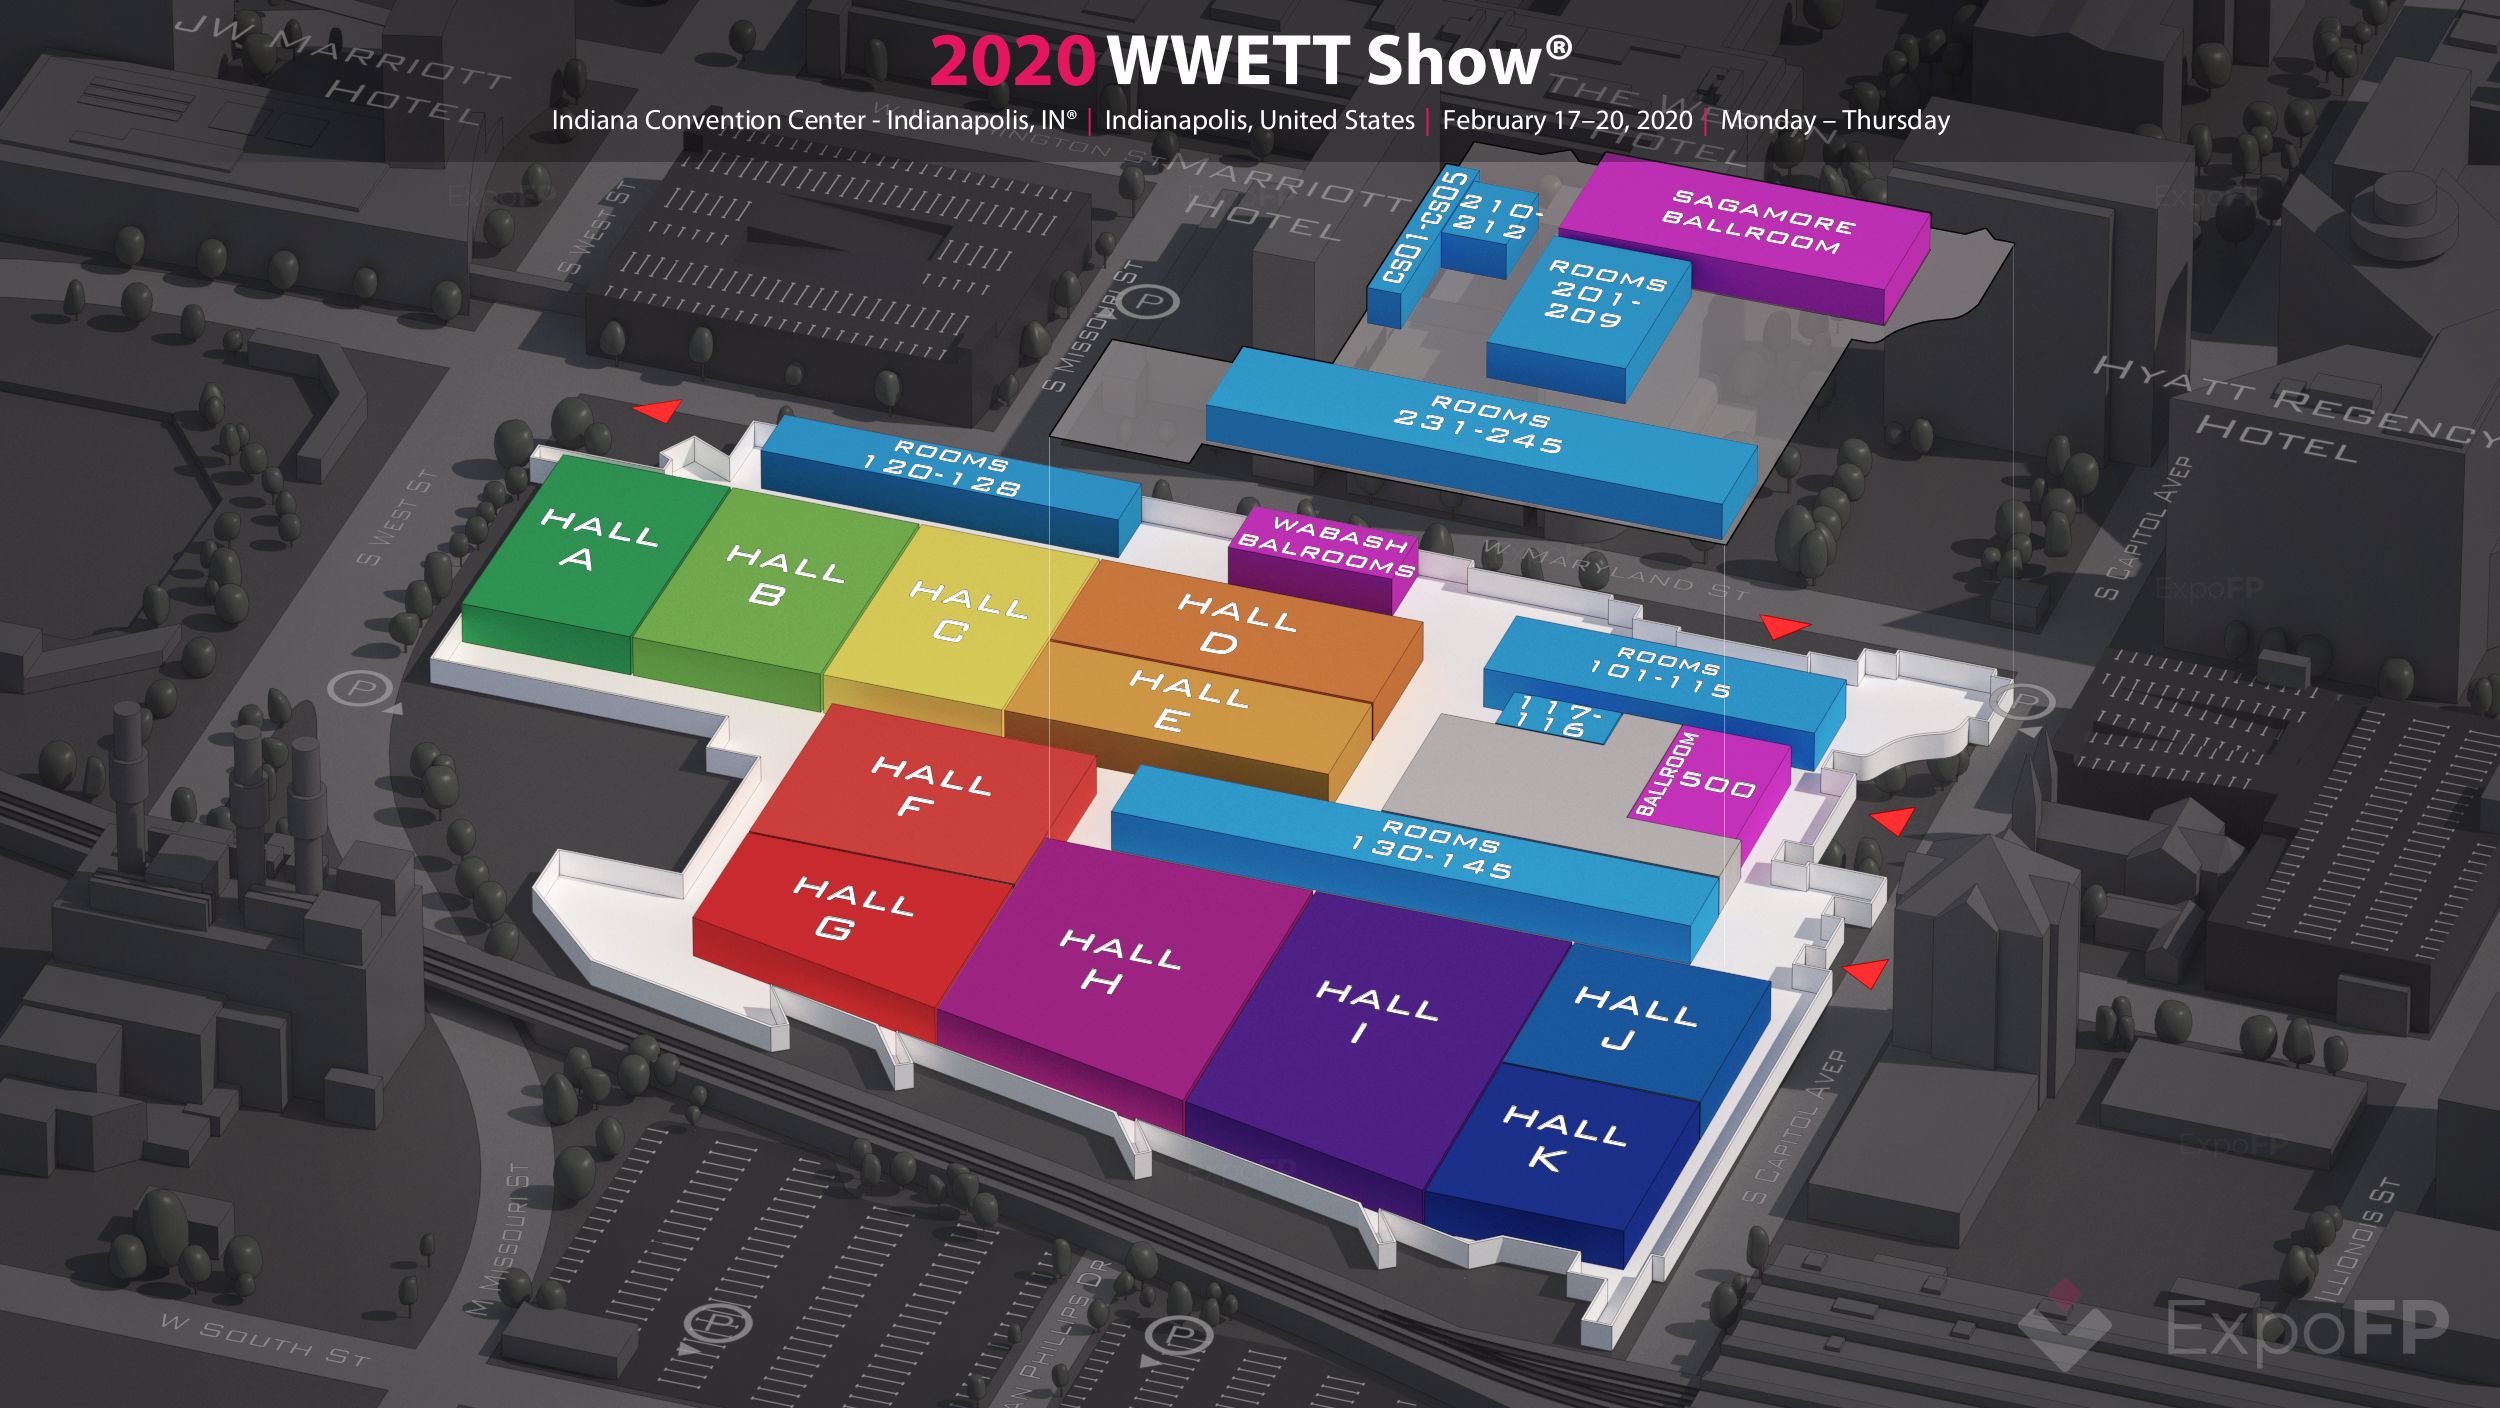 WWETT Show 2020 in Indiana Convention Center